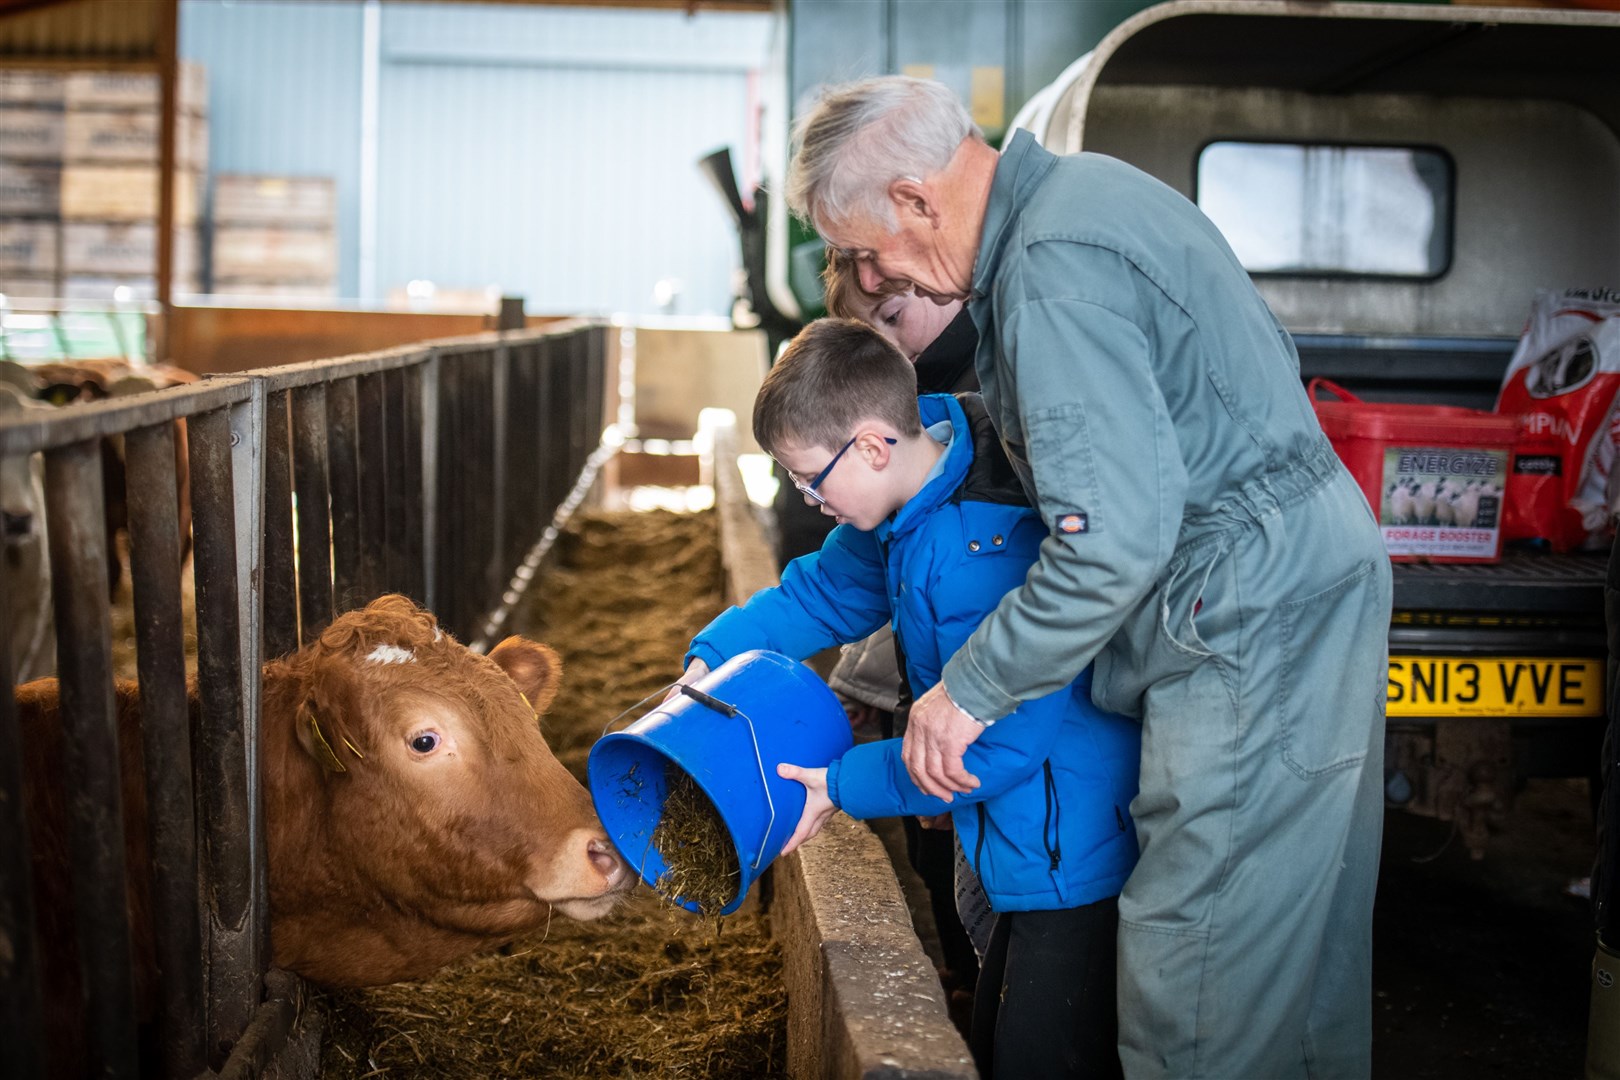 The farming family was on hand to guide children and explain what they were seeing. Picture: Callum Mackay